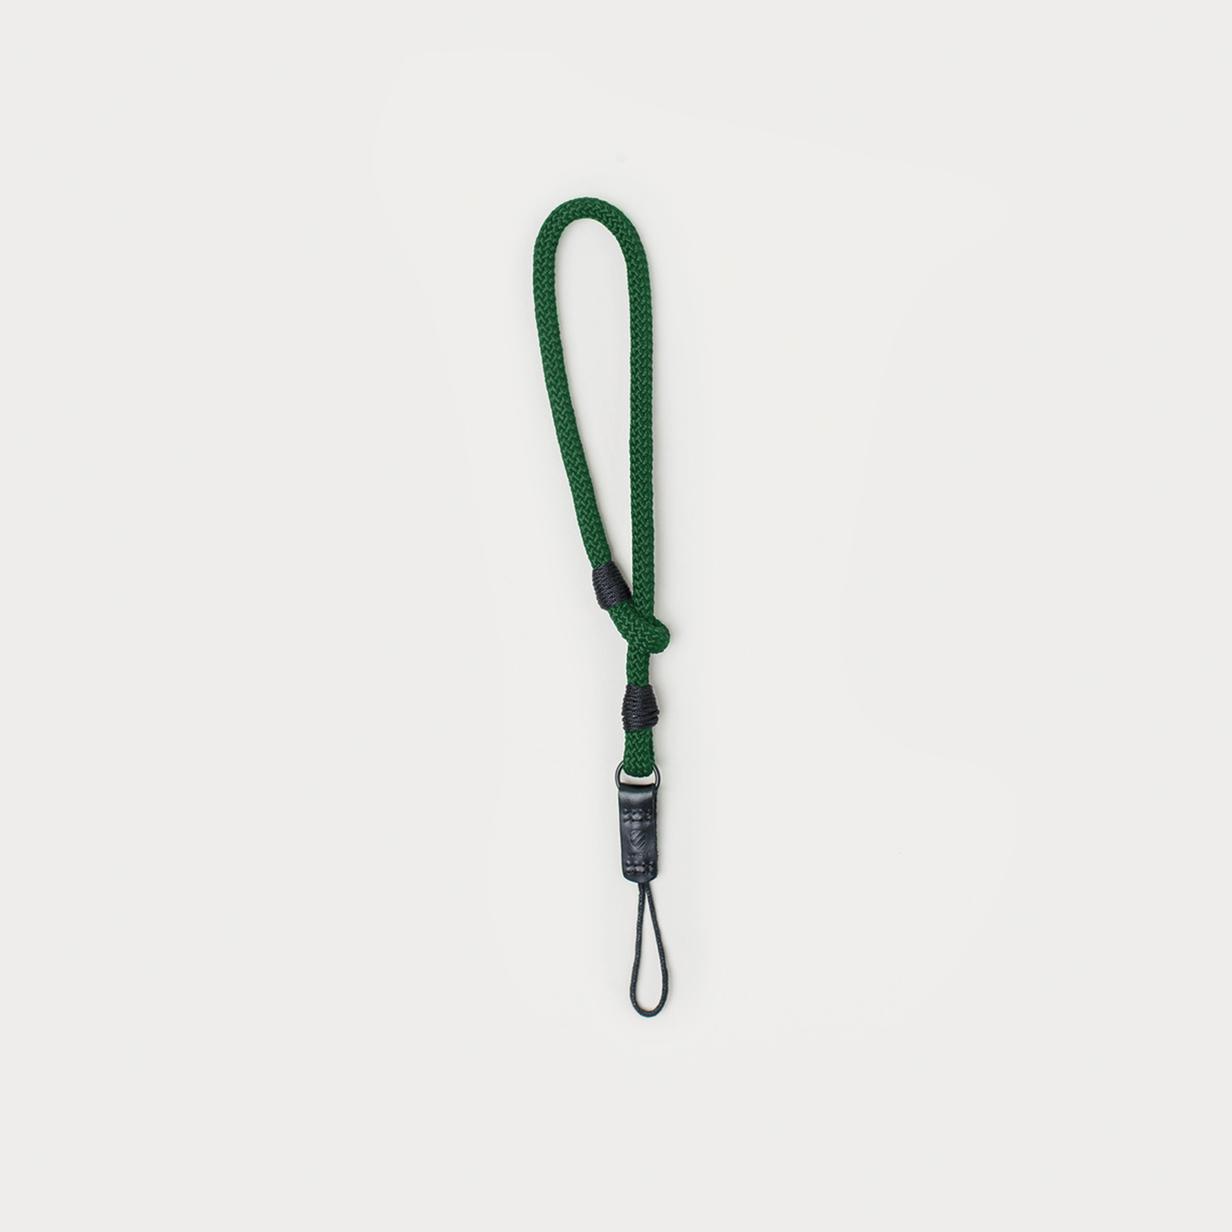 01 moment selects langly rope green 01